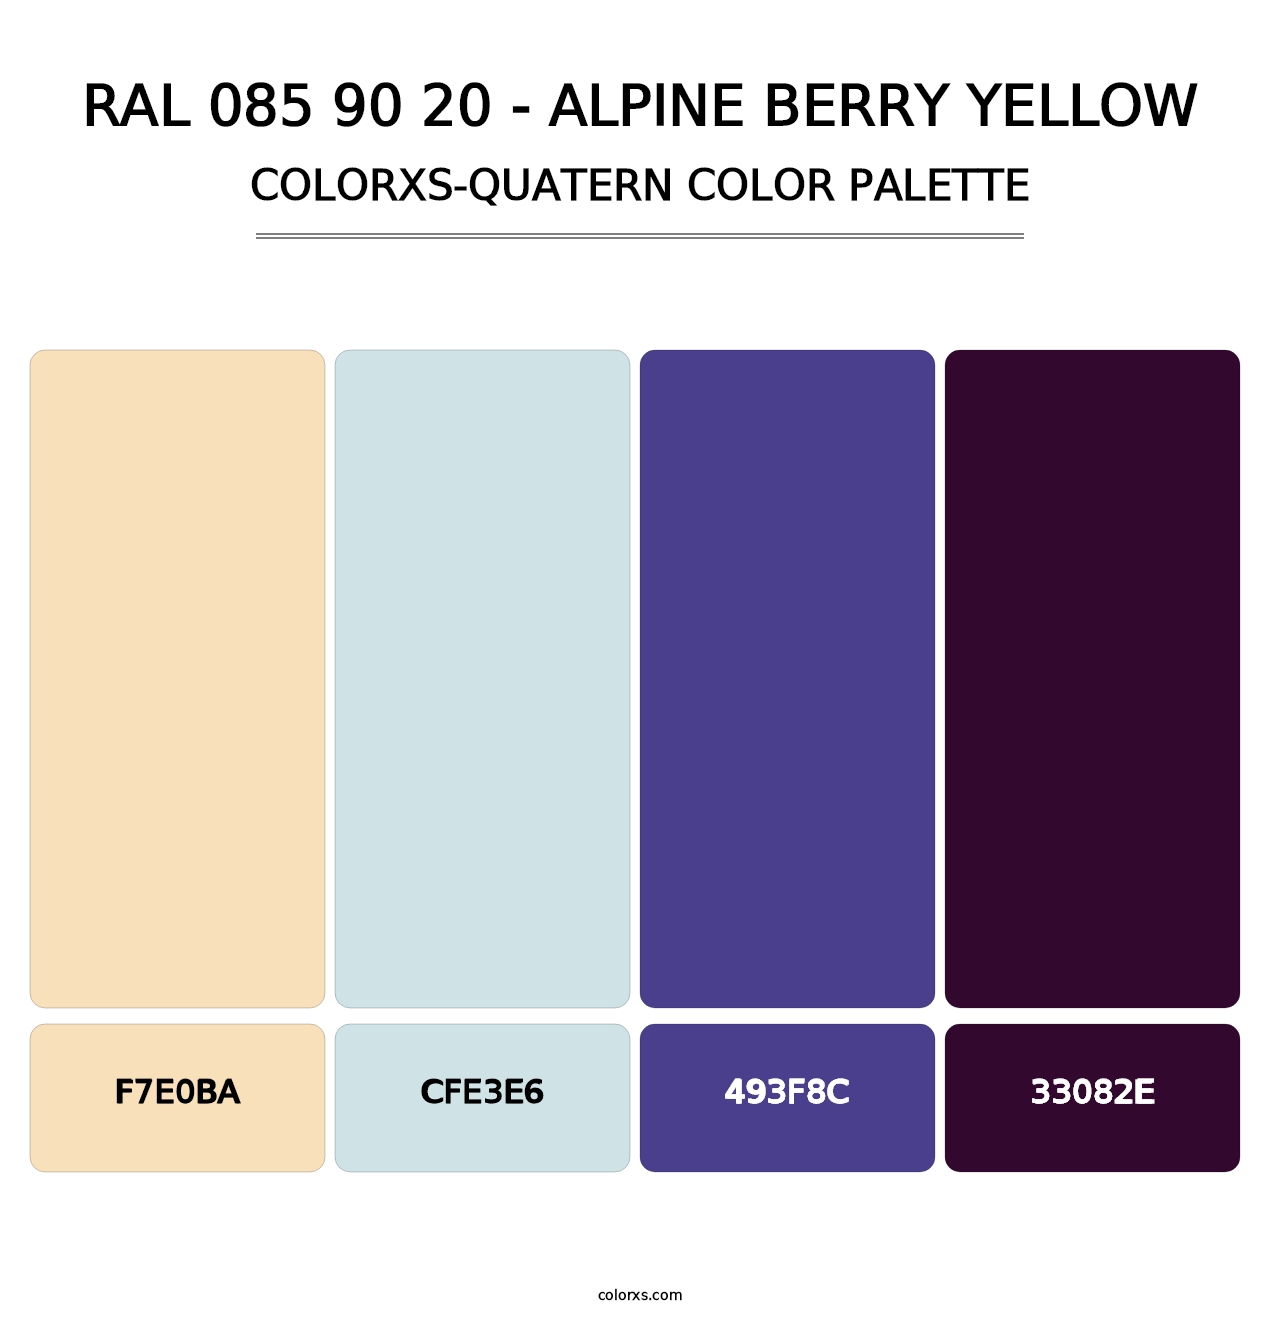 RAL 085 90 20 - Alpine Berry Yellow - Colorxs Quatern Palette